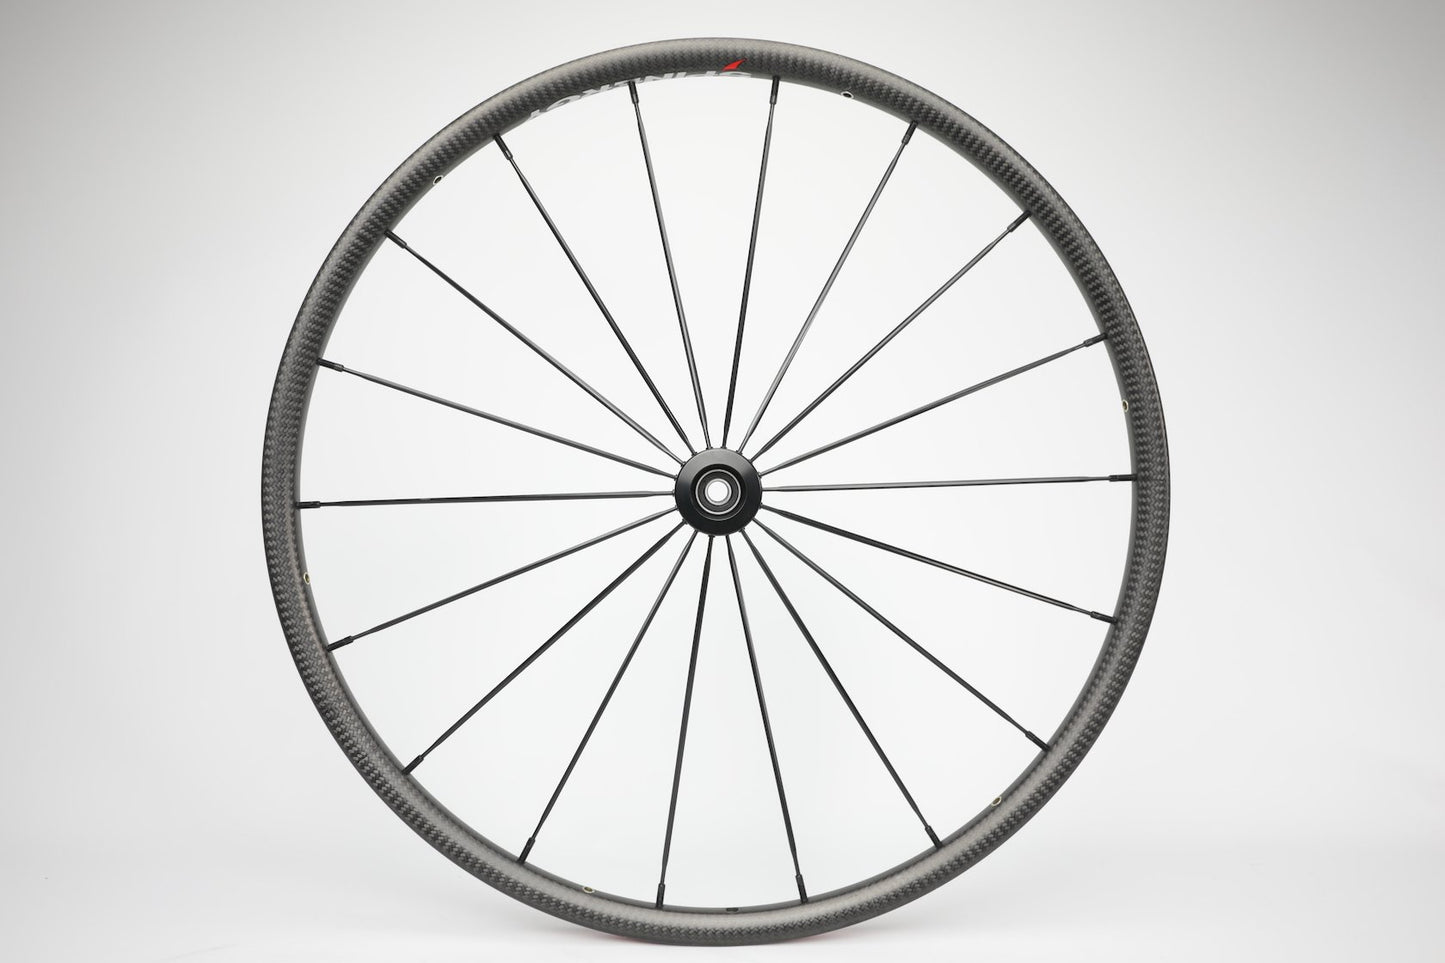 CLX Carbon Wheel by Spinergy